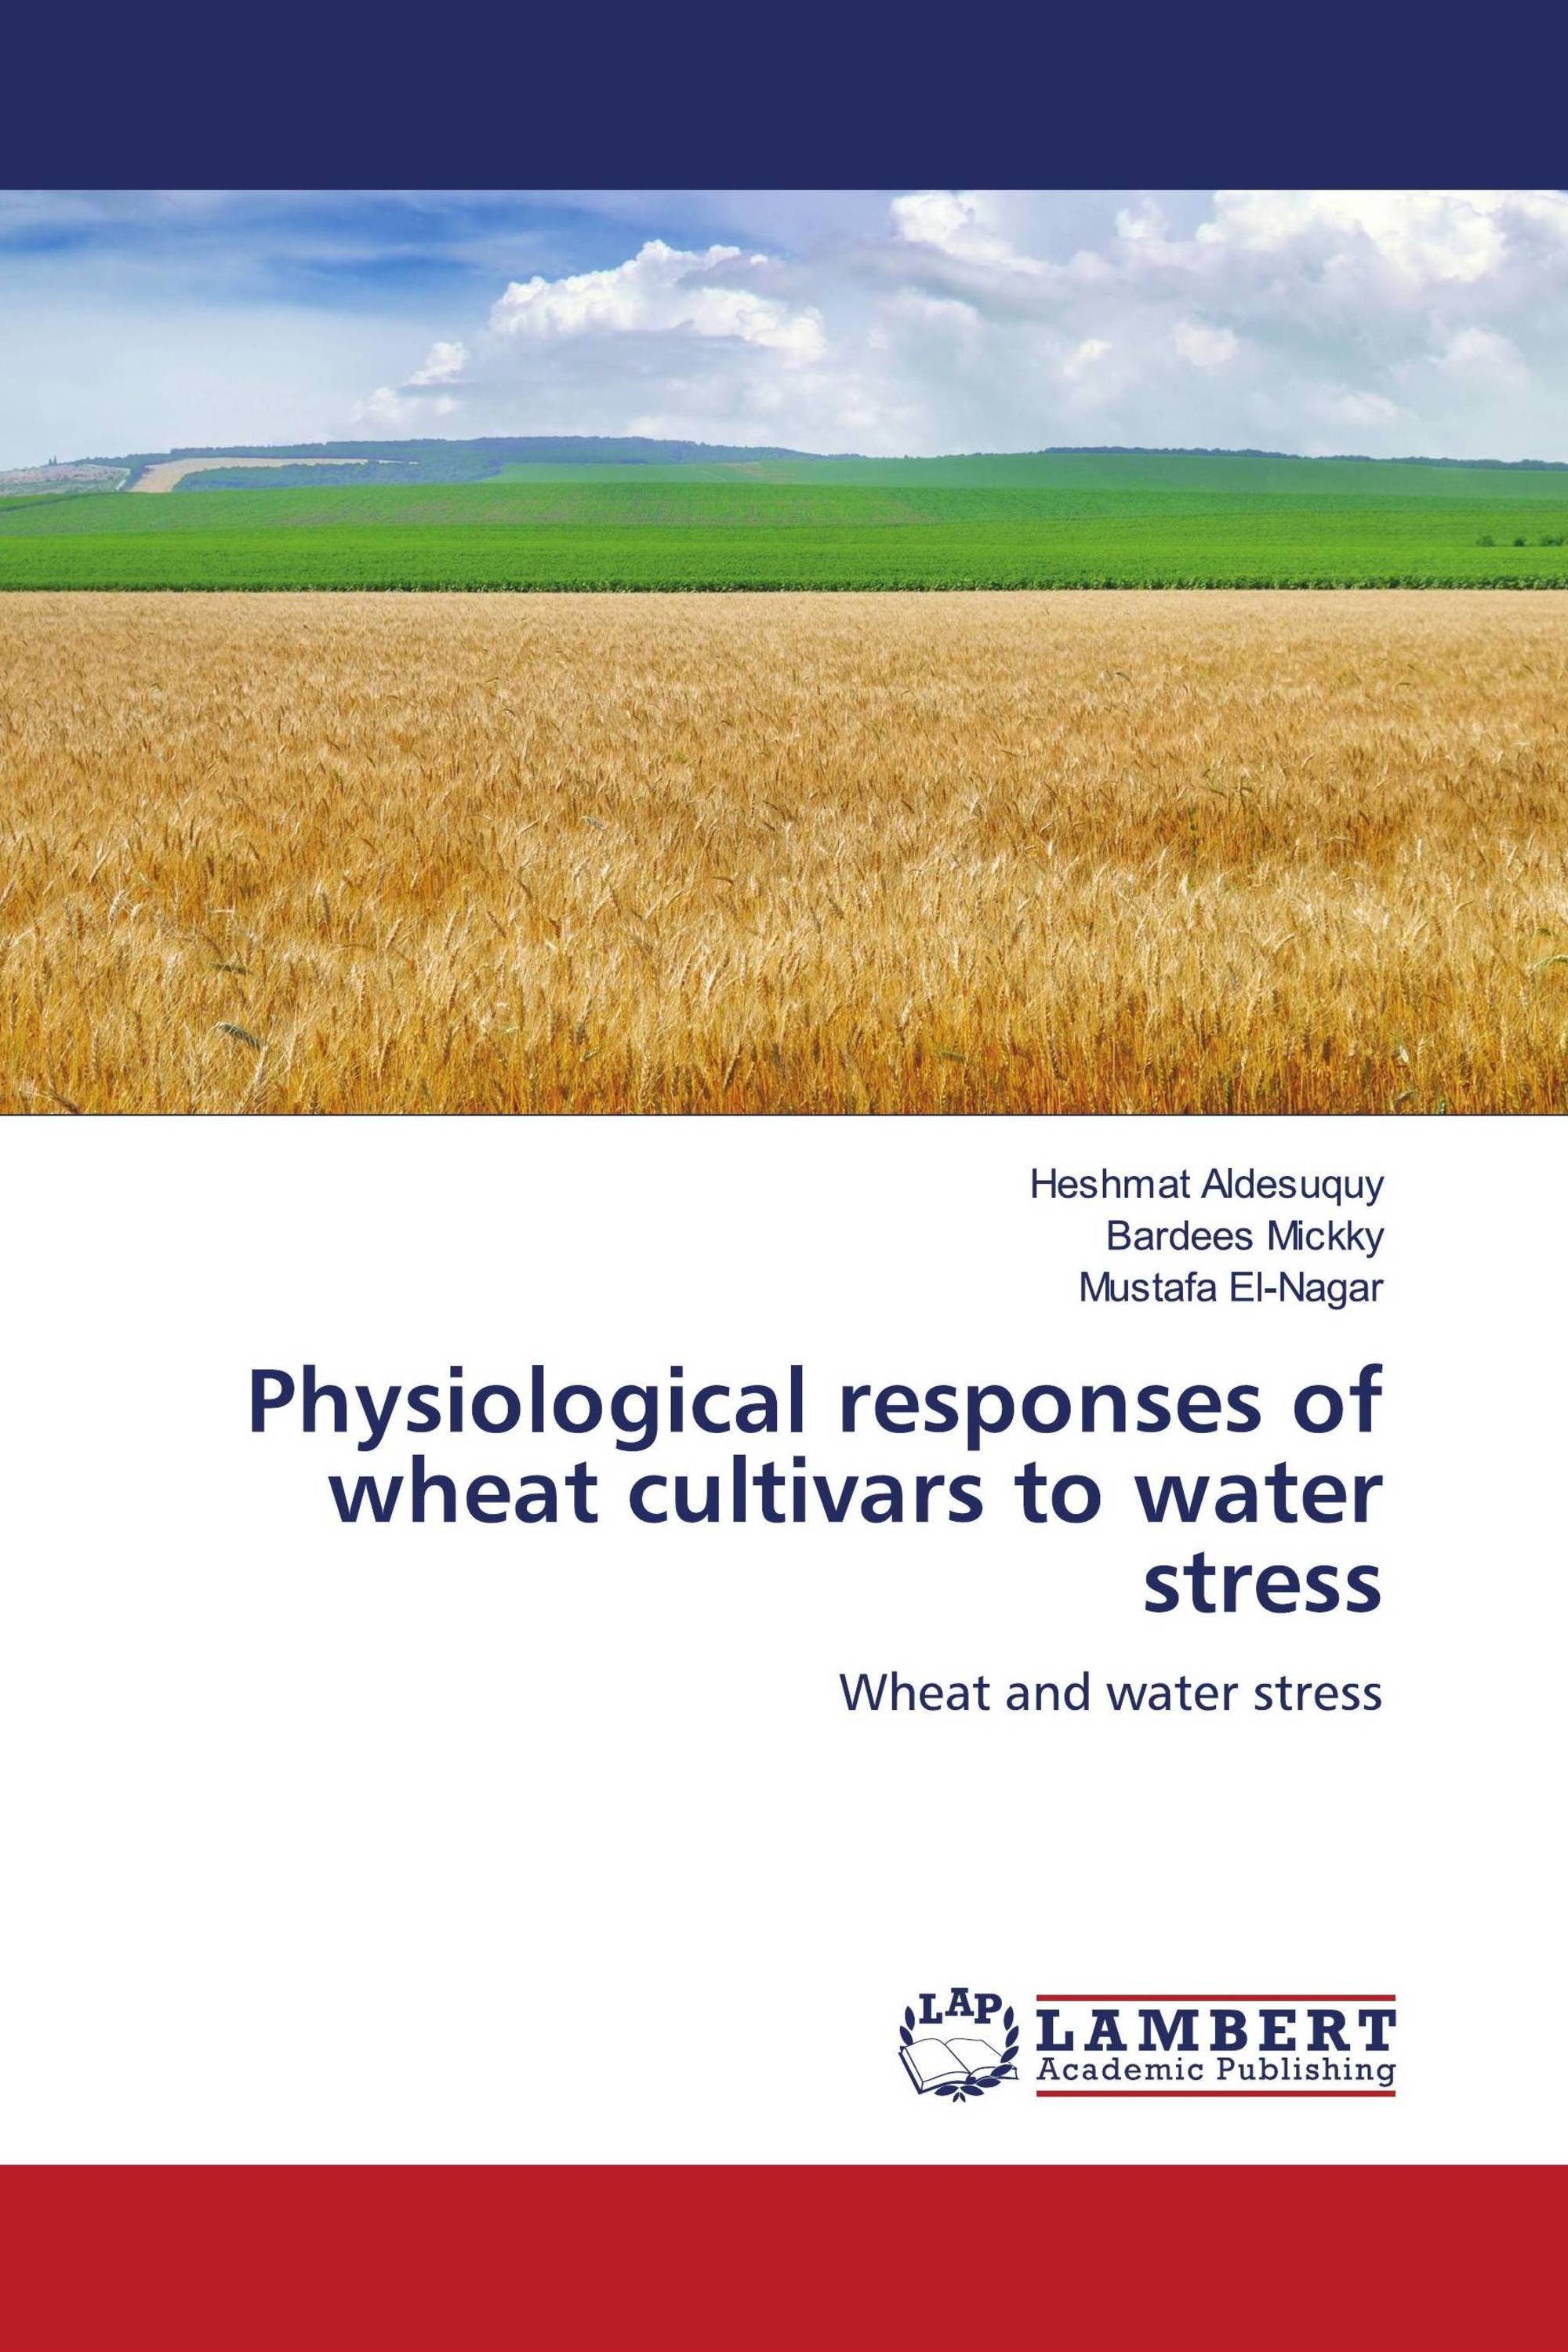 Physiological responses of wheat cultivars to water stress